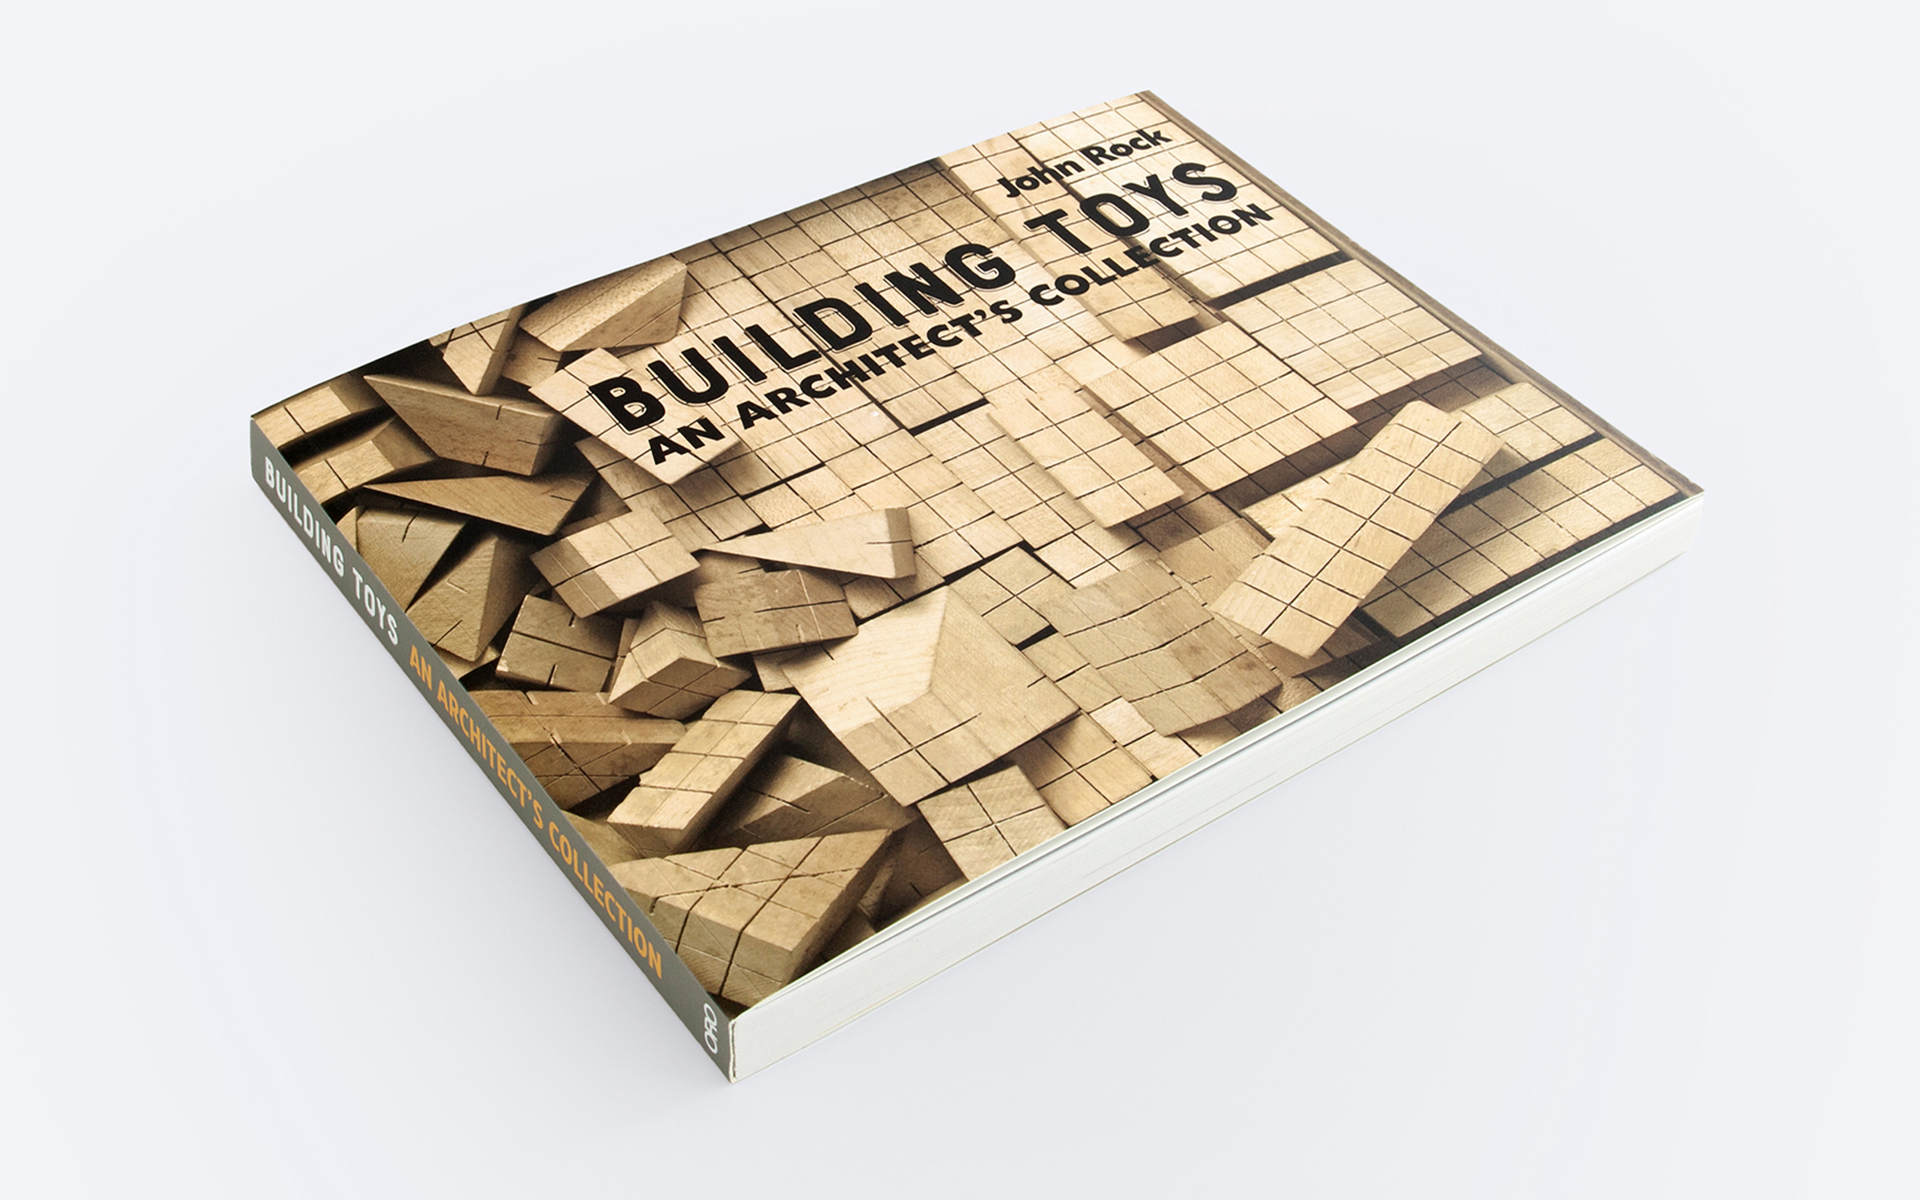 Building Toys: An Architect’s Collection. Book cover, design by Pablo Mandel.